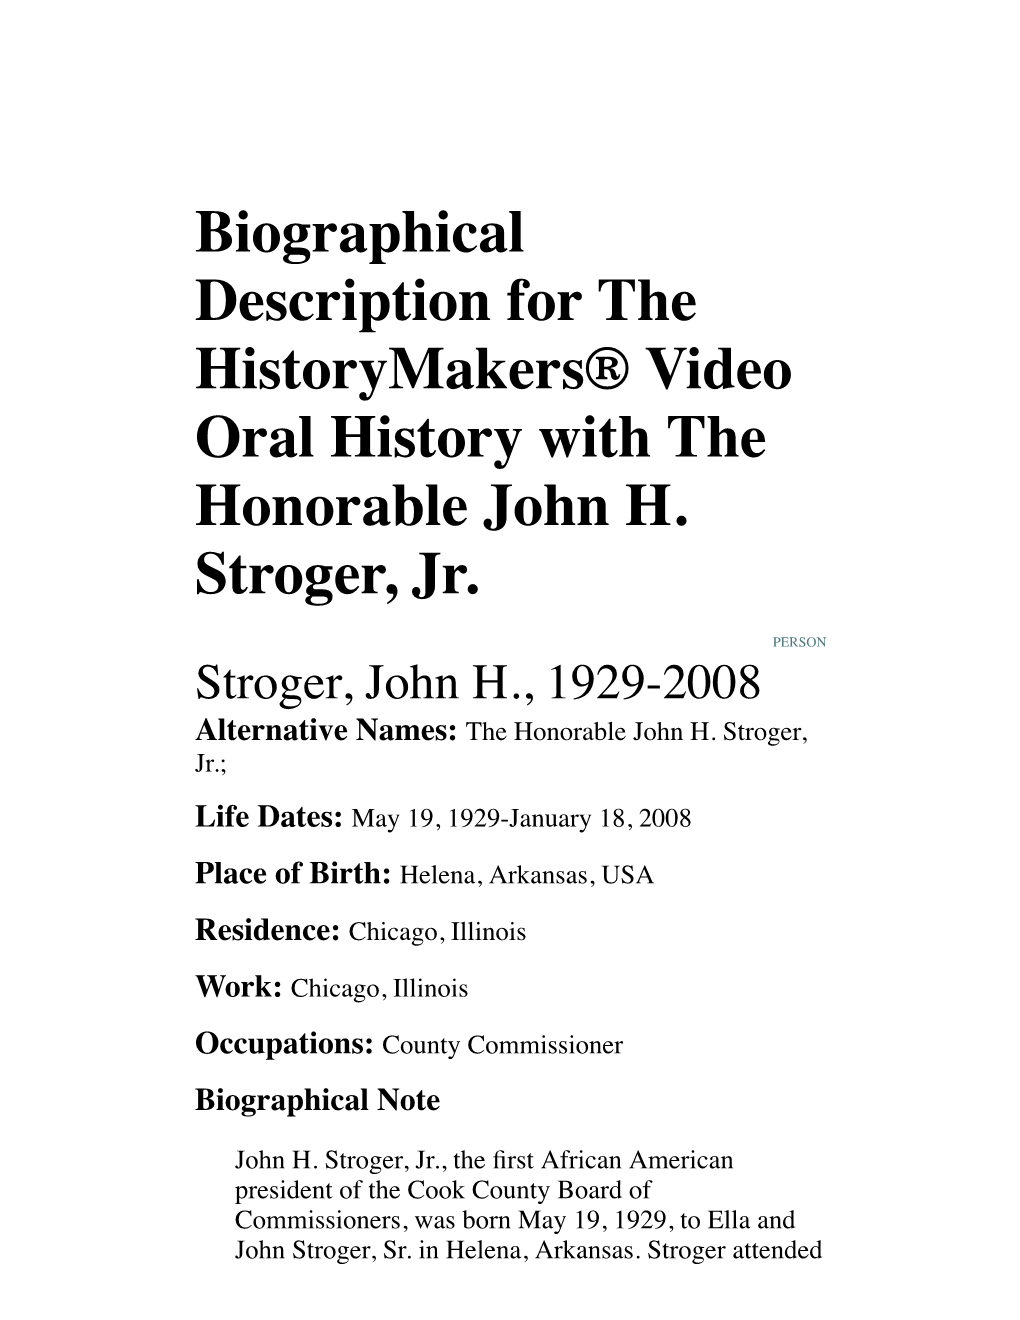 Biographical Description for the Historymakers® Video Oral History with the Honorable John H. Stroger, Jr